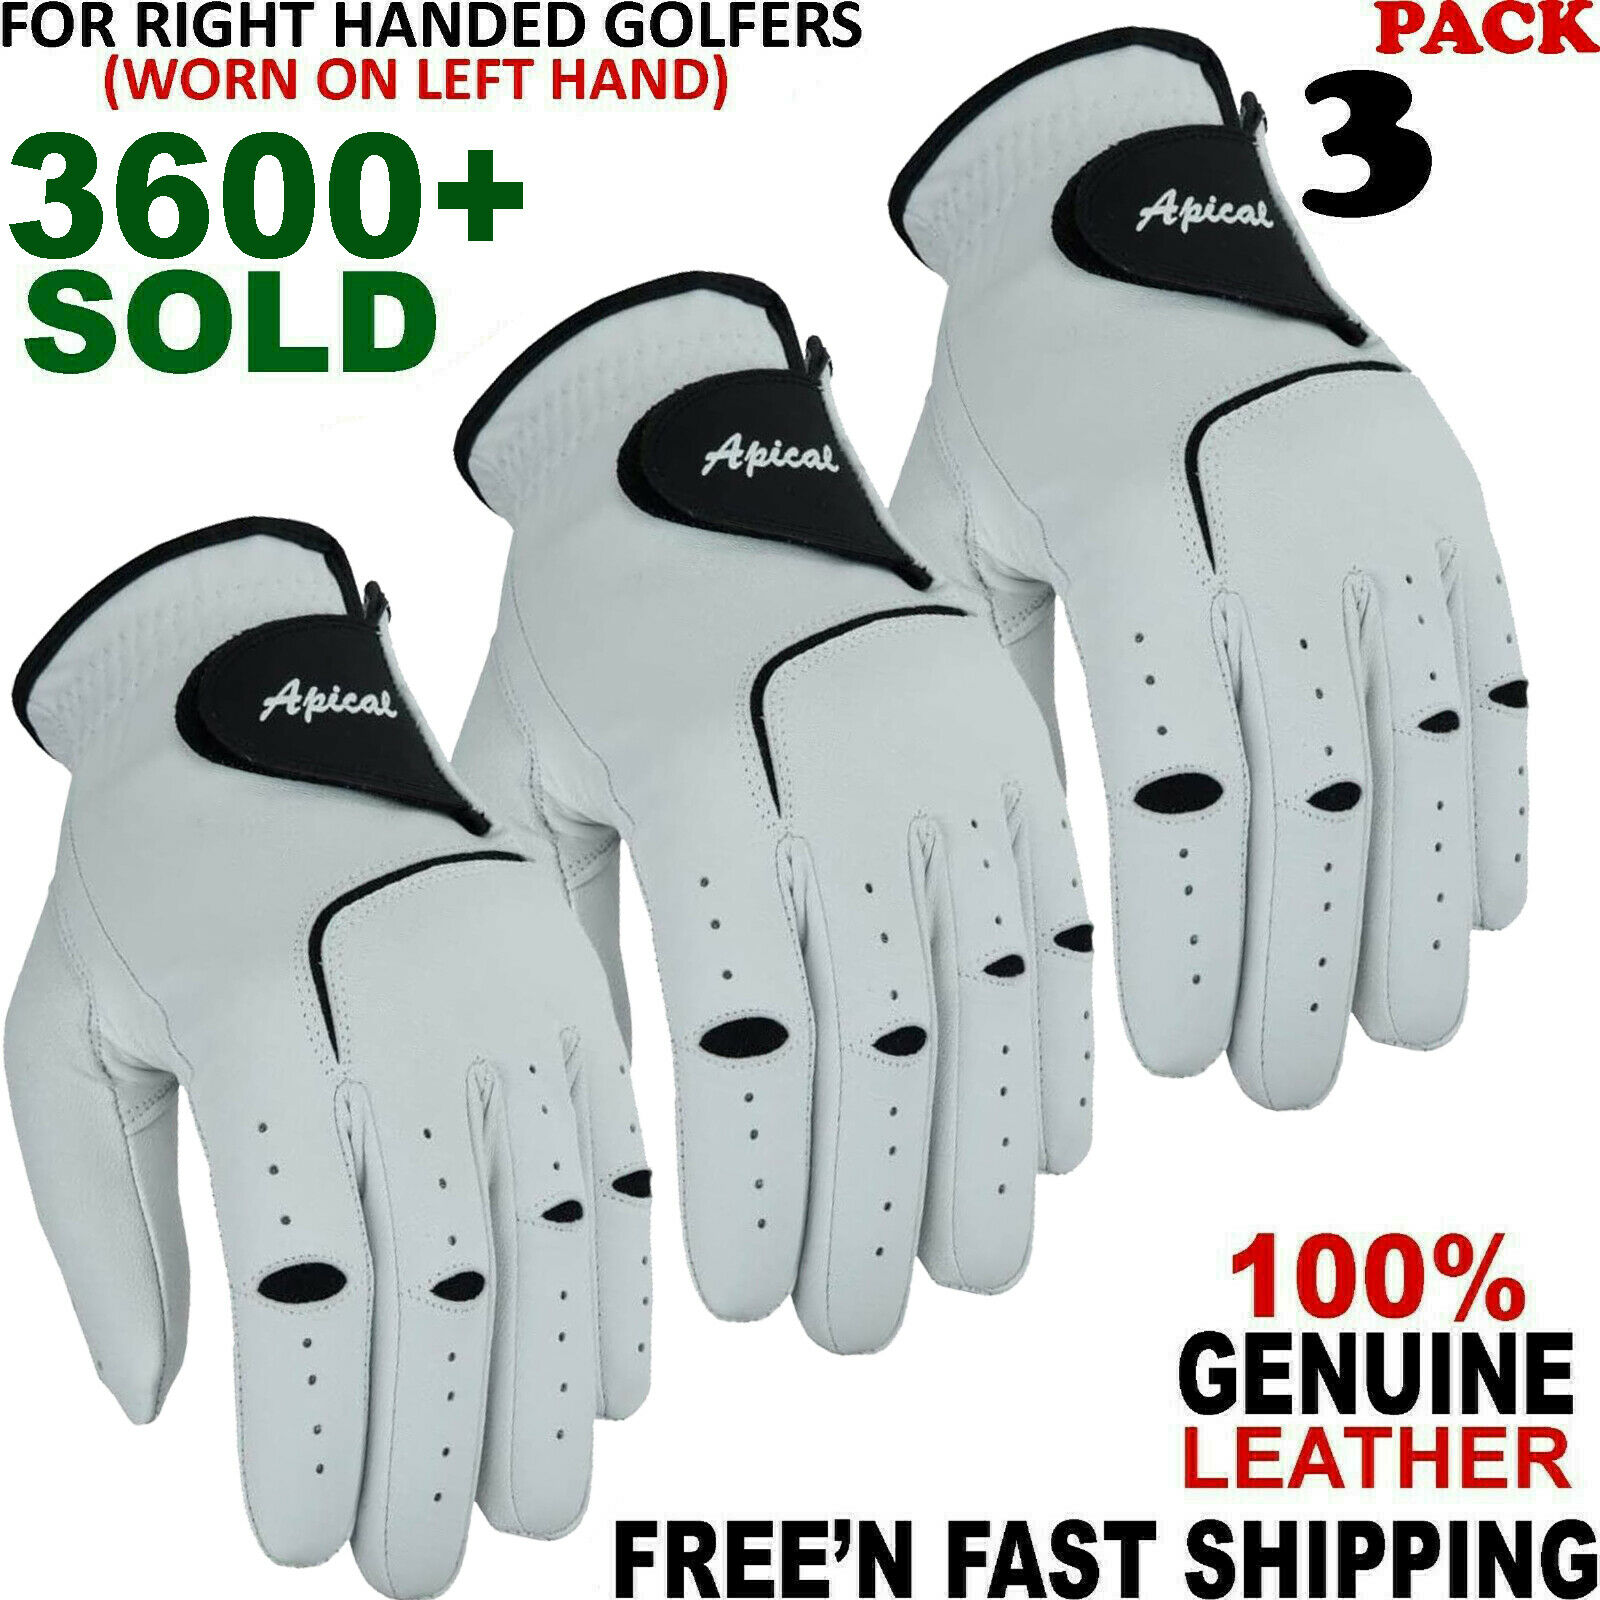 Pack Of 3 Brand New Golf Glove 100% Cabretta Leather Free Fast Shipping